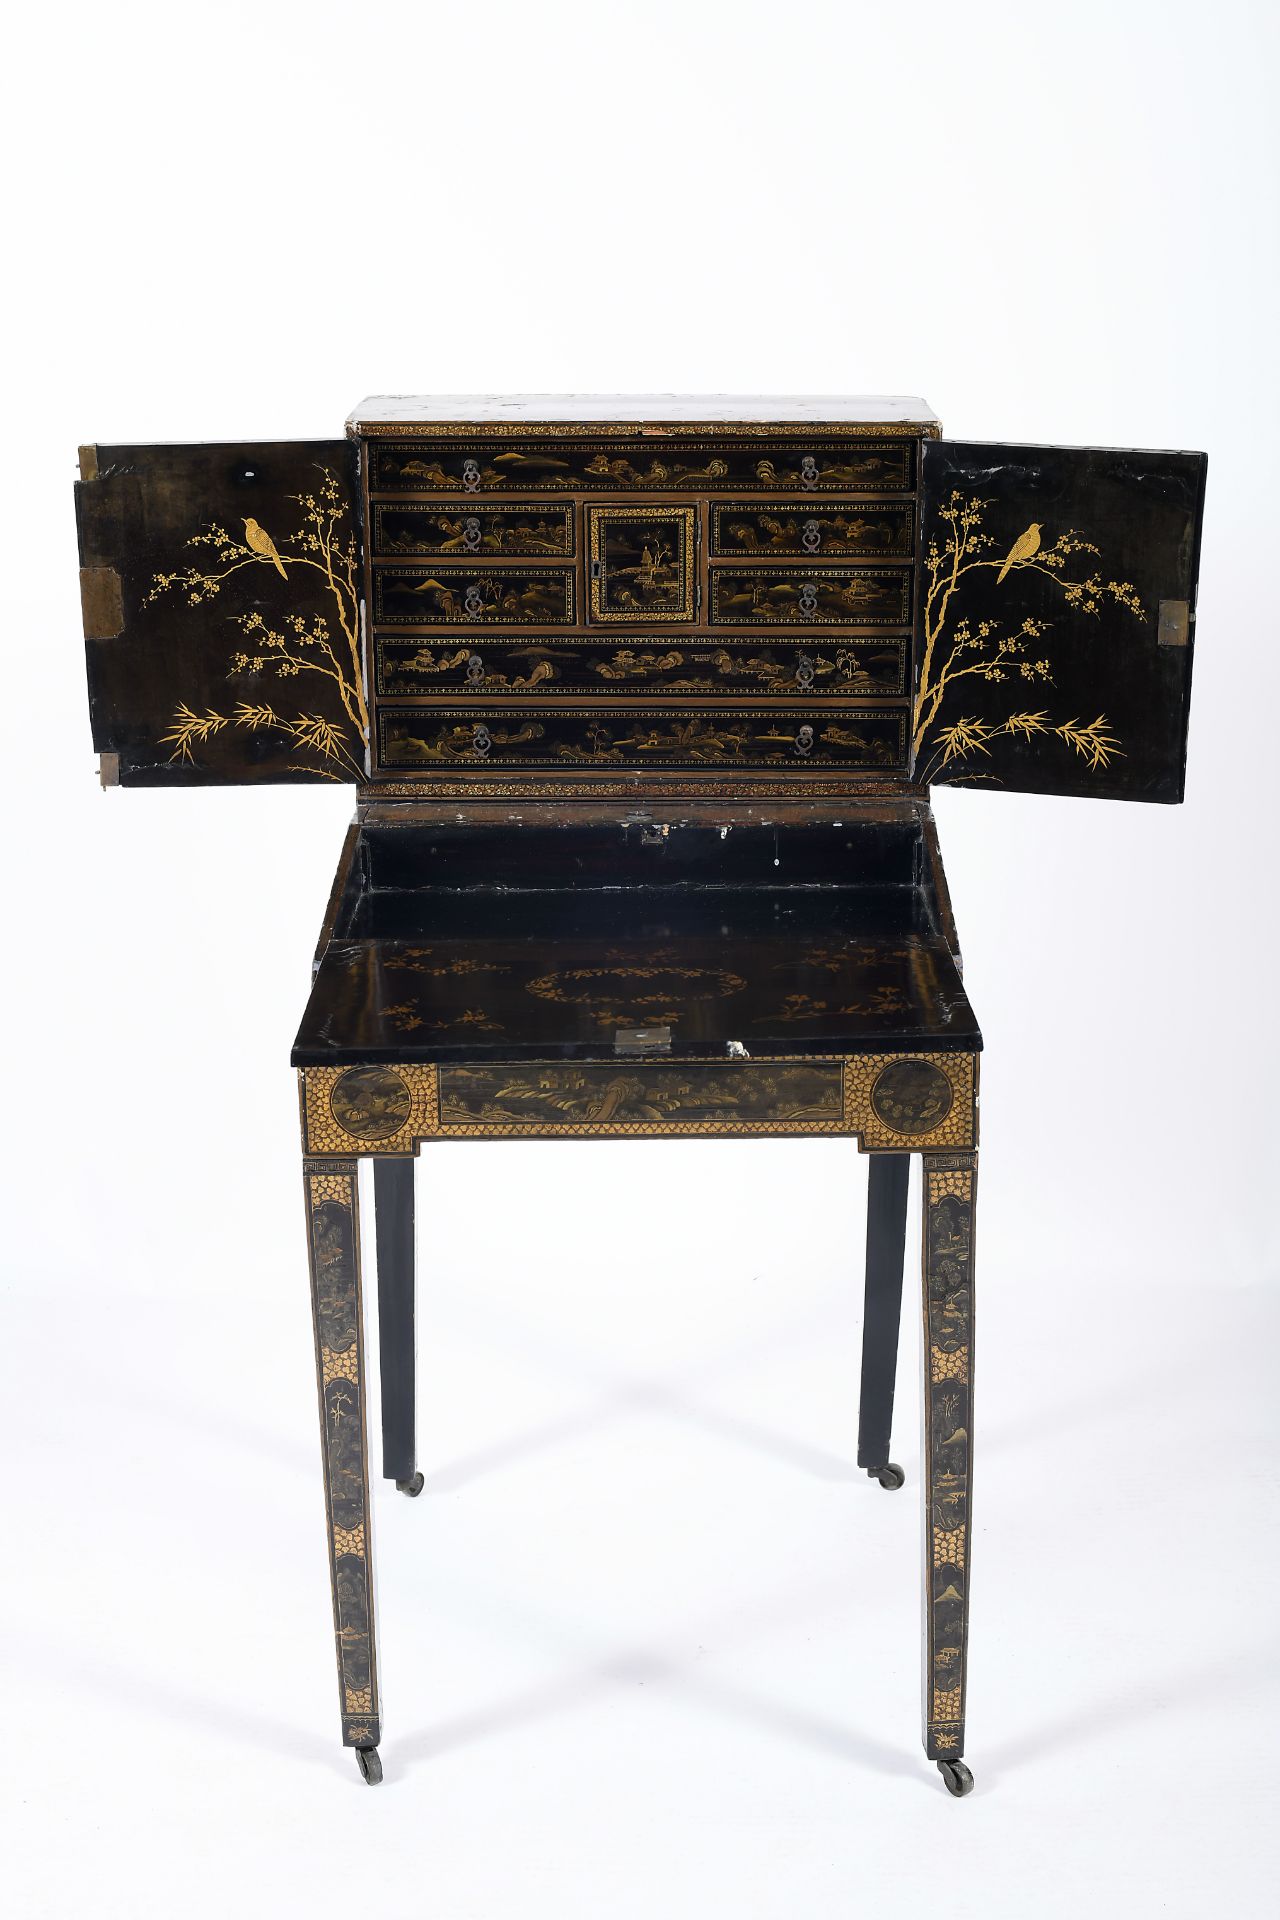 A lady's desk with removable bureau and two-door top/cabinet - Image 4 of 6